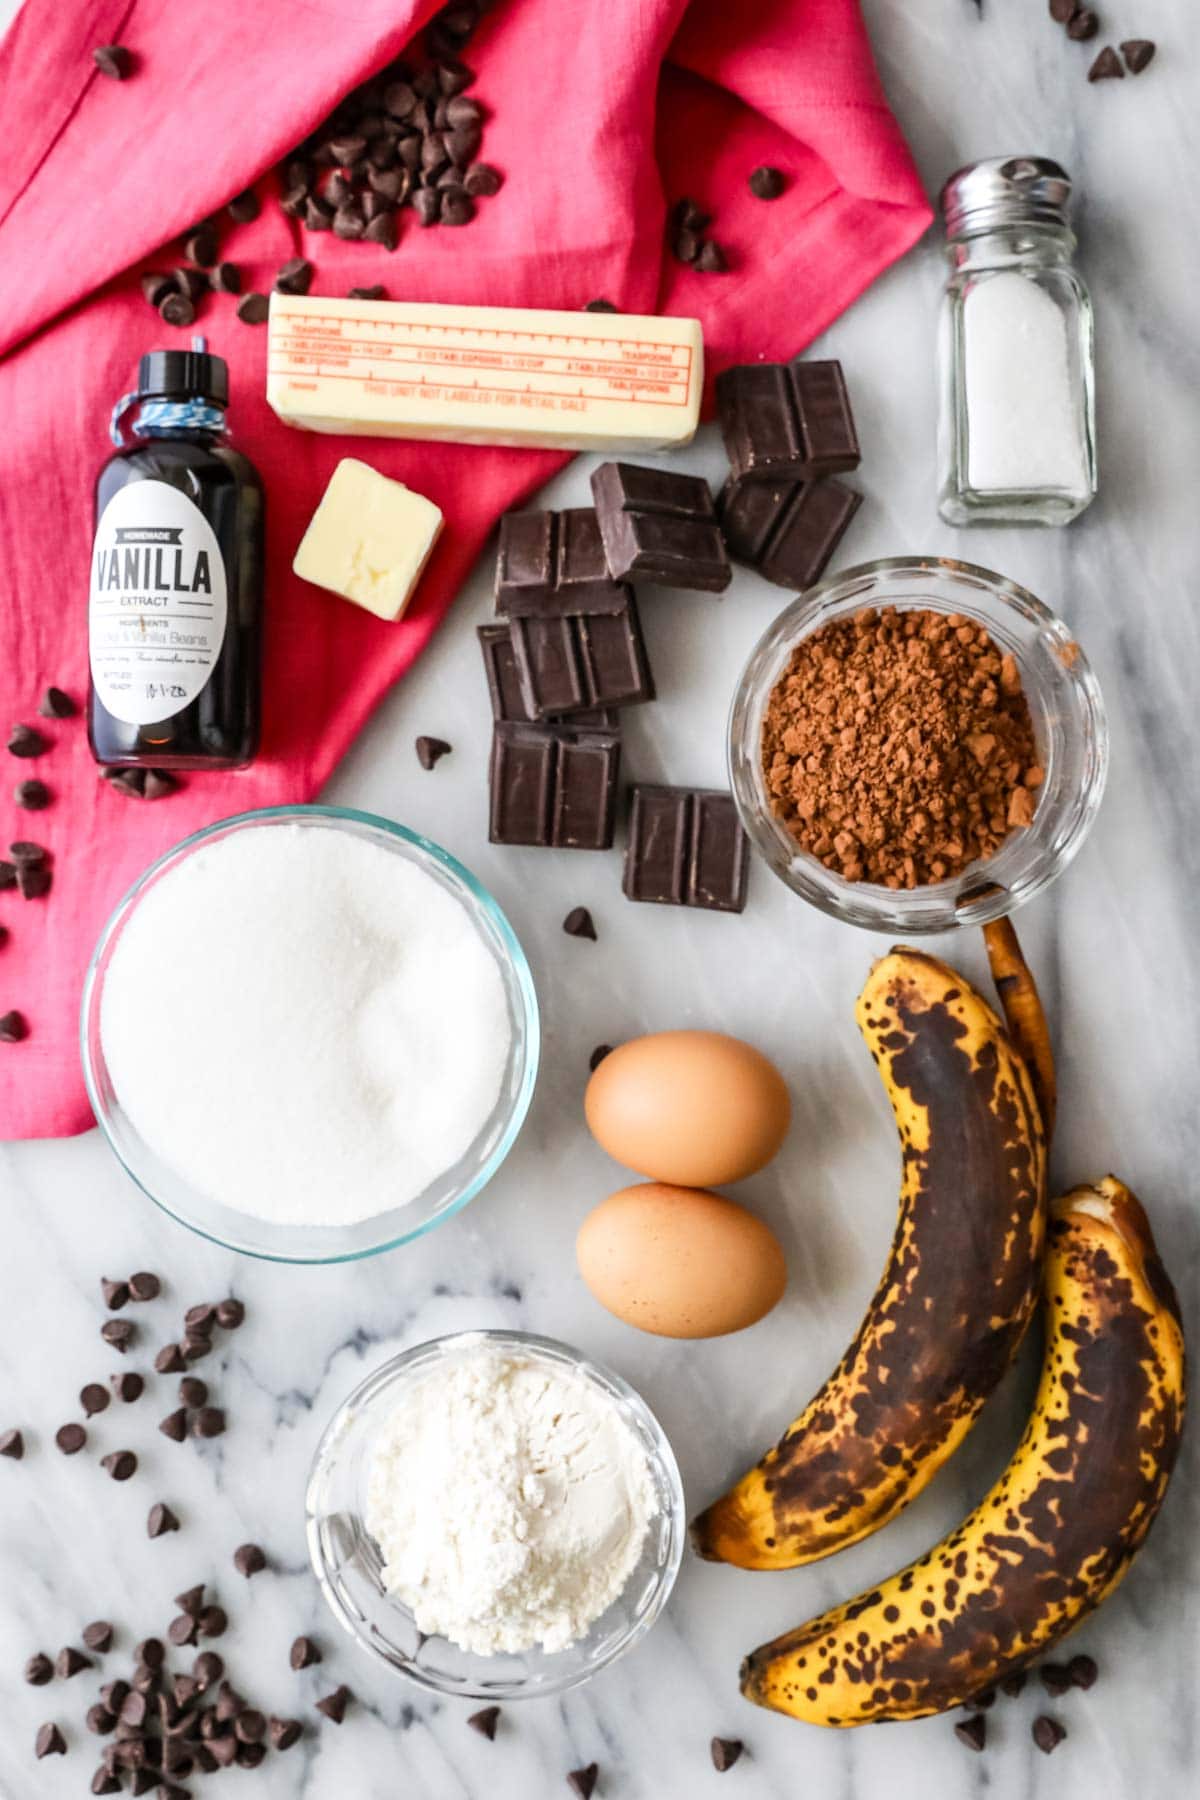 Overhead view of ingredients including bananas, chocolate, cocoa powder, and more.